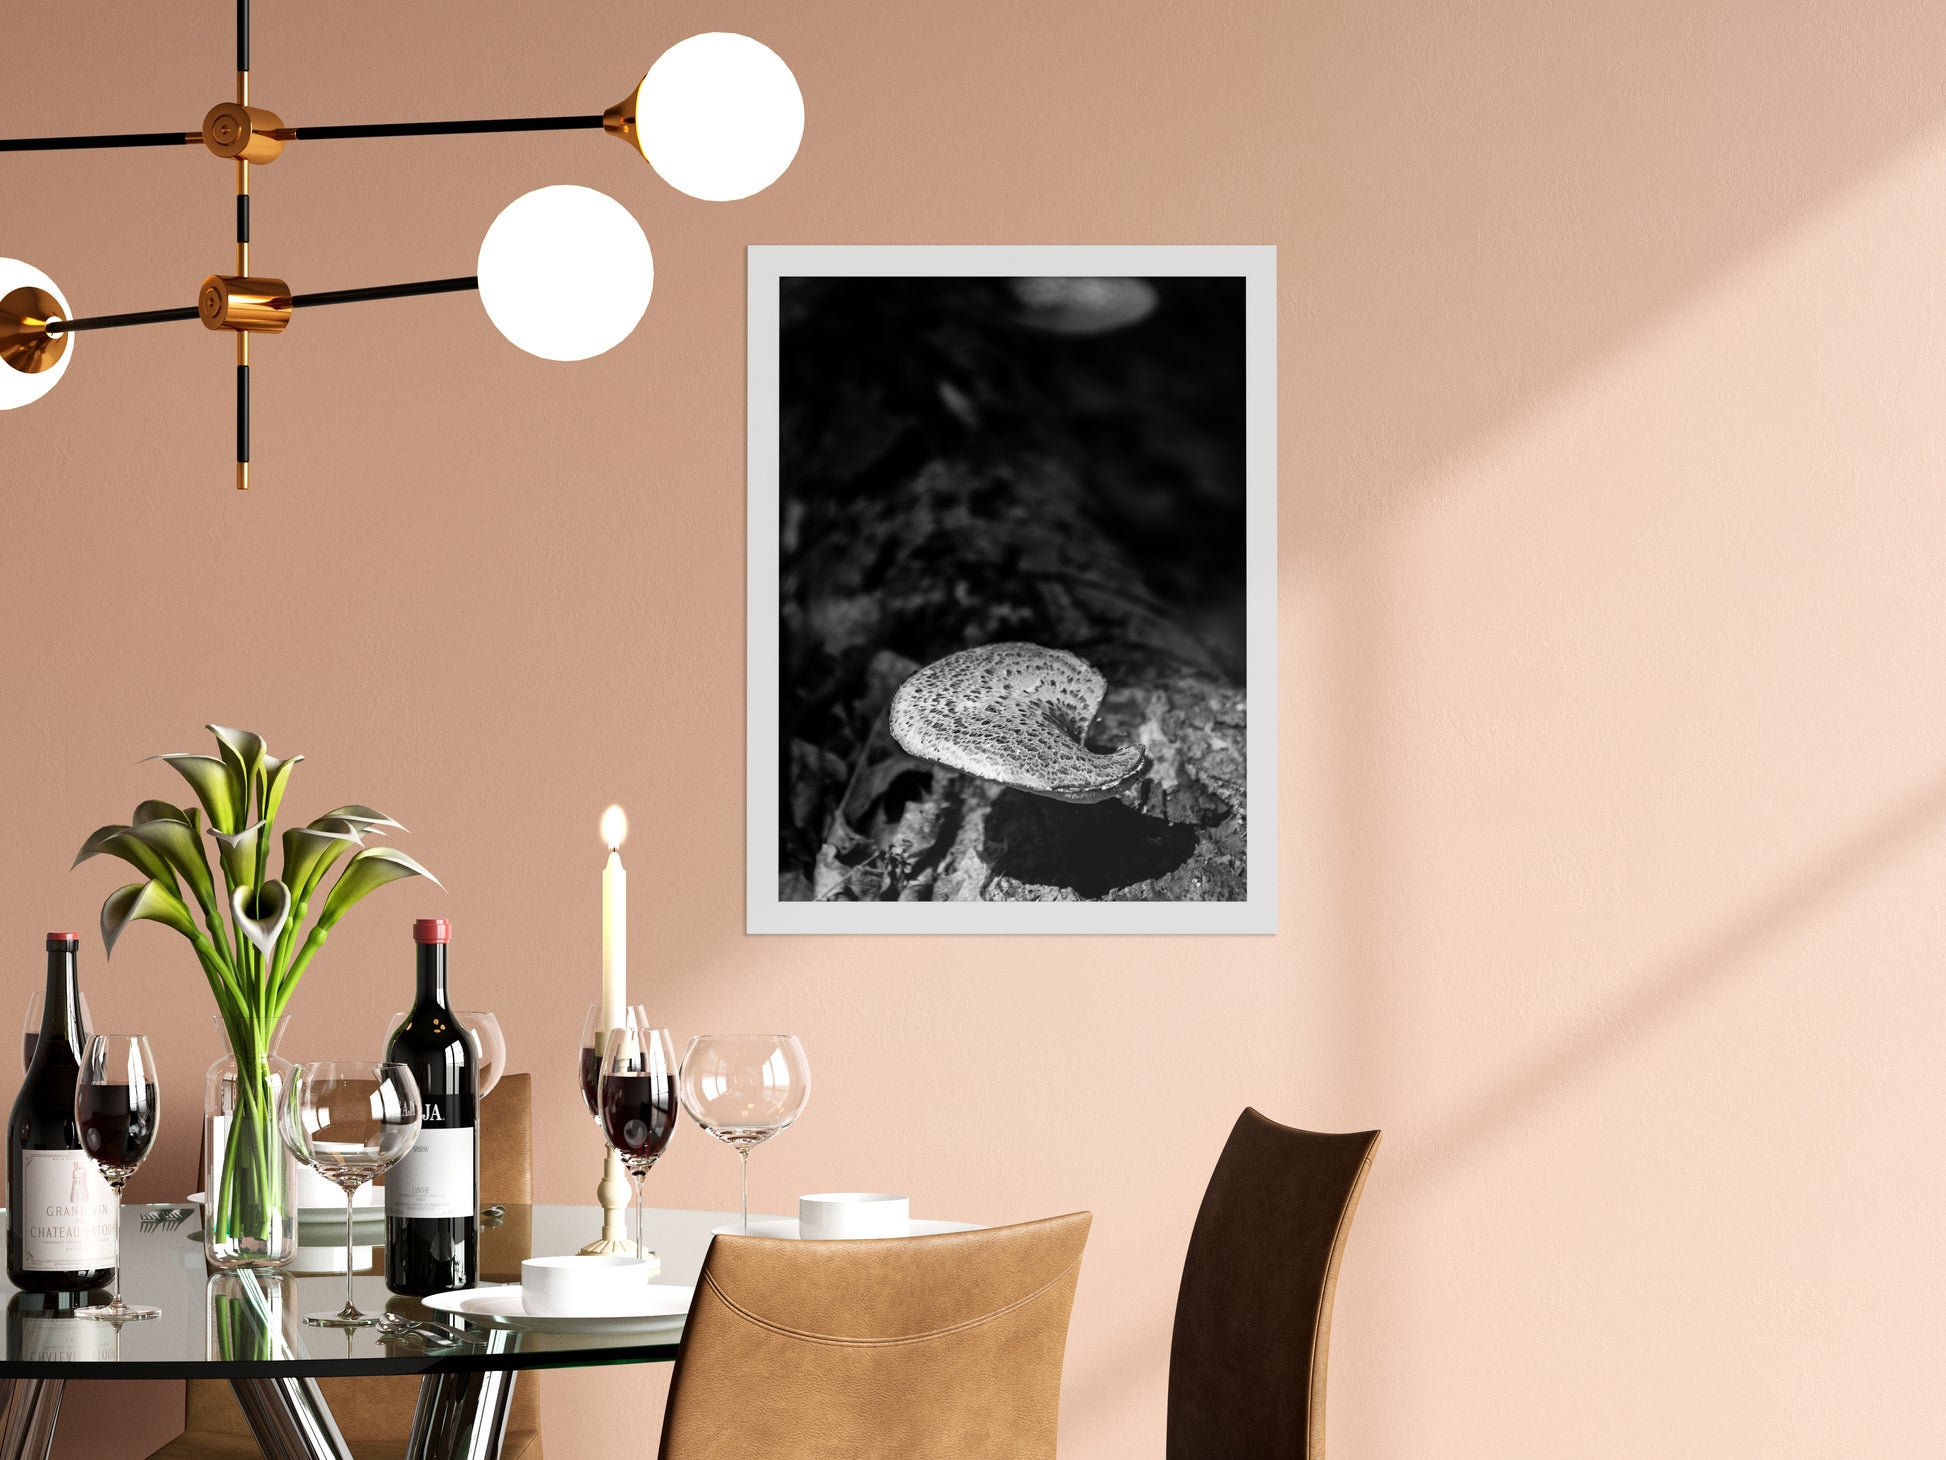 Black And White Prints For Dining Room: Mushroom on Log in Black & White Rustic / Country Style Nature Photo Framed Wall Art Print